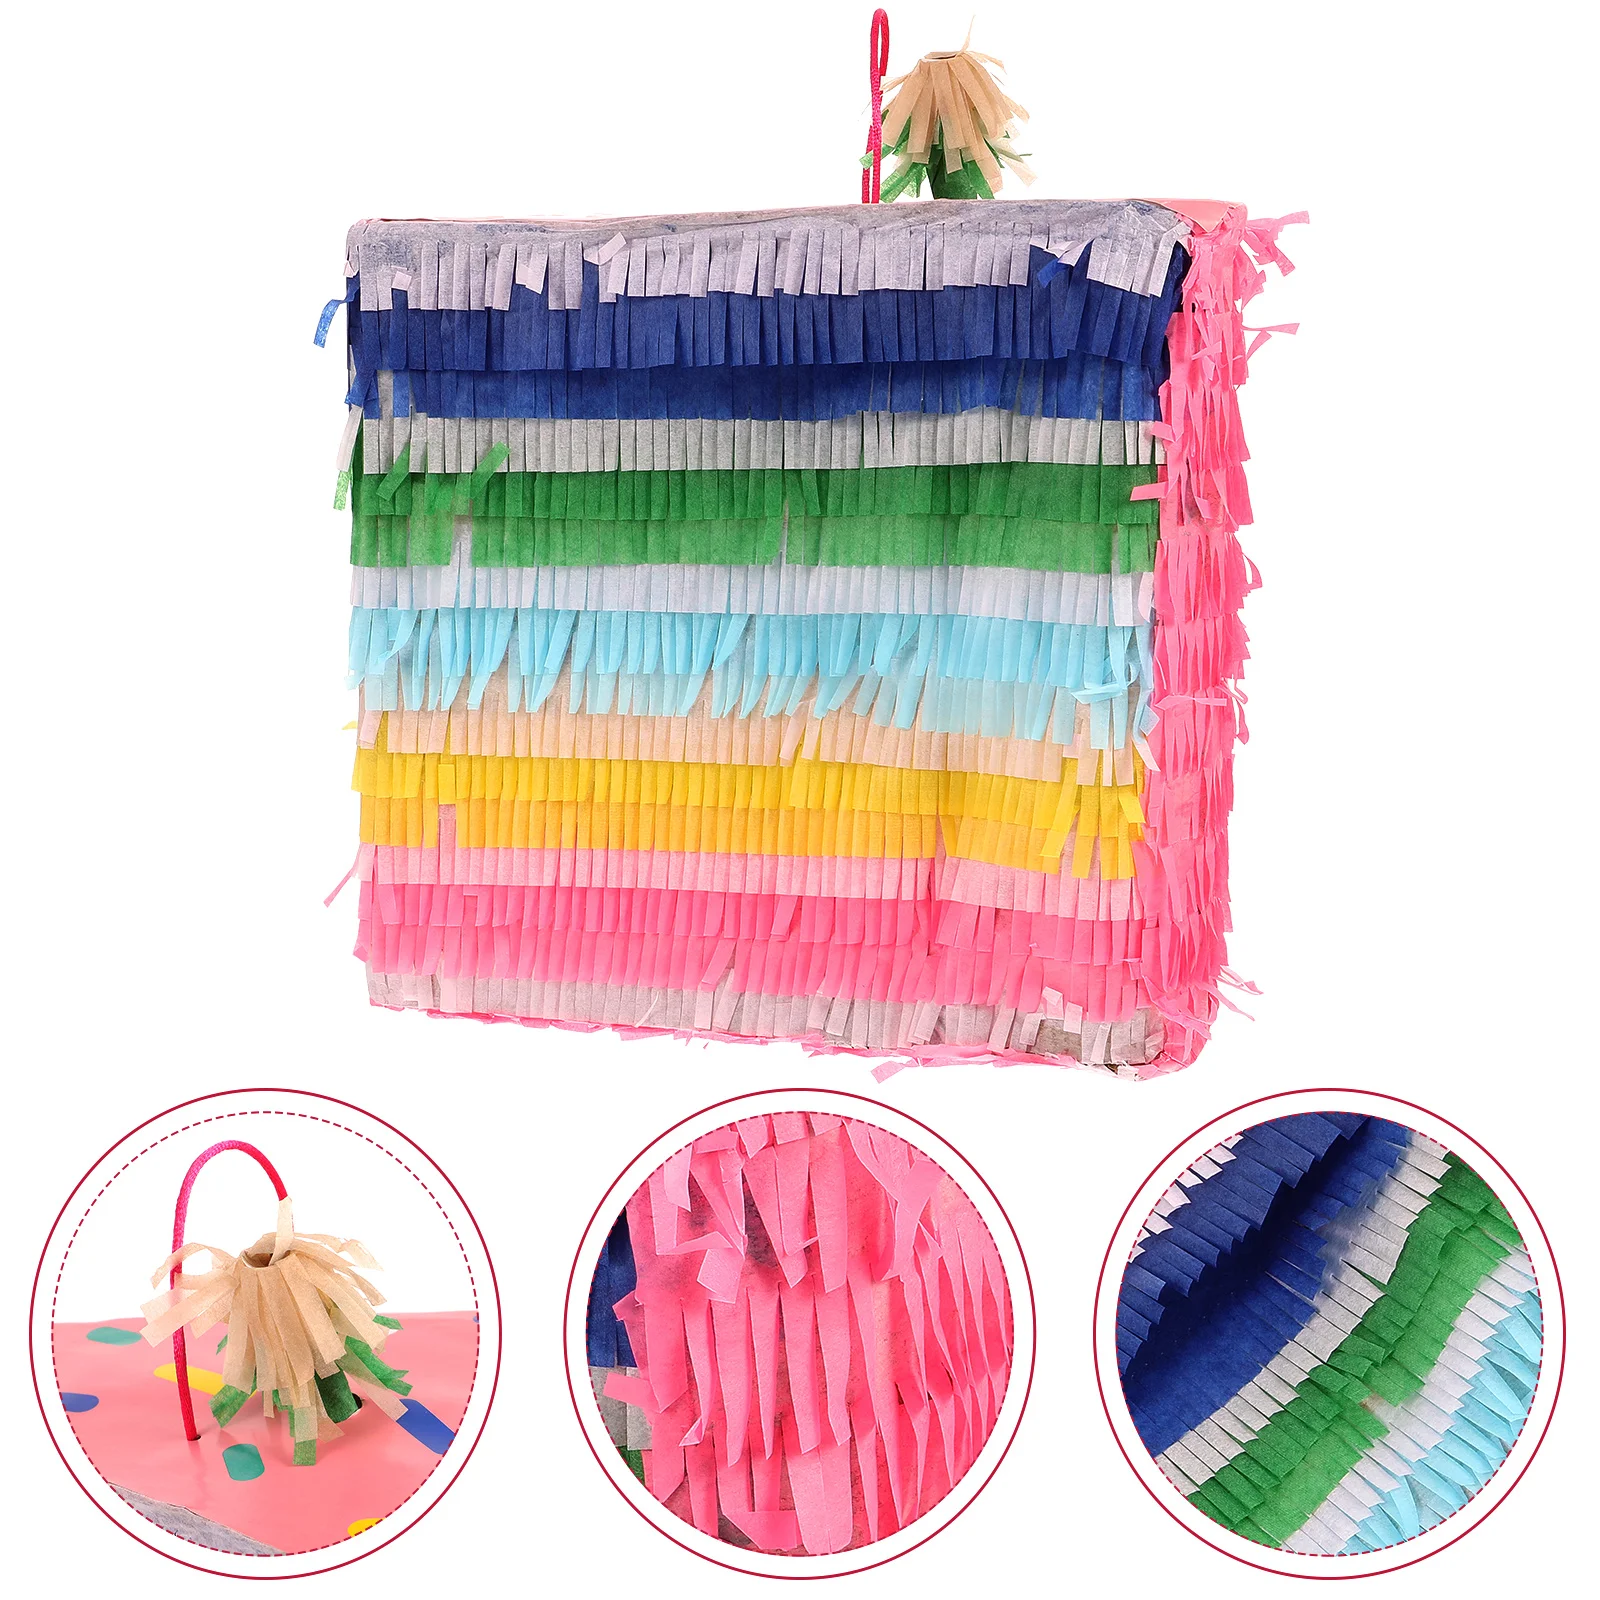 

Decor Party Paper Pinata Cardboard Adorn Filled Decoration Festival Hanging Child Ornament Cake Shaped